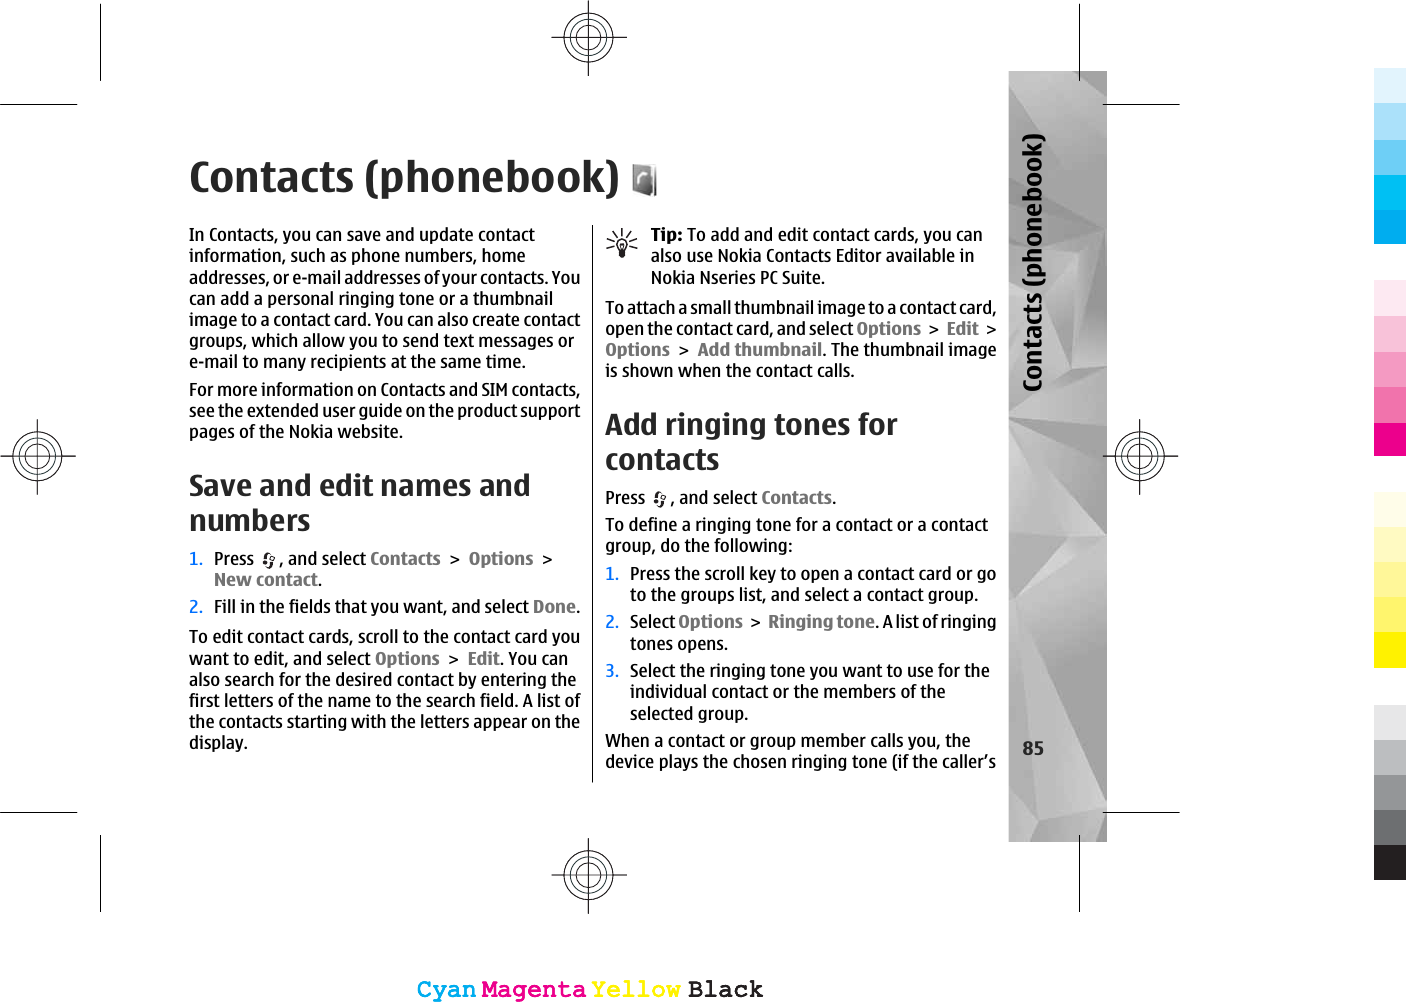 Contacts (phonebook)In Contacts, you can save and update contactinformation, such as phone numbers, homeaddresses, or e-mail addresses of your contacts. Youcan add a personal ringing tone or a thumbnailimage to a contact card. You can also create contactgroups, which allow you to send text messages ore-mail to many recipients at the same time.For more information on Contacts and SIM contacts,see the extended user guide on the product supportpages of the Nokia website.Save and edit names andnumbers1. Press , and select ContactsOptionsNew contact.2. Fill in the fields that you want, and select Done.To edit contact cards, scroll to the contact card youwant to edit, and select OptionsEdit. You canalso search for the desired contact by entering thefirst letters of the name to the search field. A list ofthe contacts starting with the letters appear on thedisplay.Tip: To add and edit contact cards, you canalso use Nokia Contacts Editor available inNokia Nseries PC Suite.To attach a small thumbnail image to a contact card,open the contact card, and select OptionsEditOptionsAdd thumbnail. The thumbnail imageis shown when the contact calls. Add ringing tones forcontactsPress , and select Contacts.To define a ringing tone for a contact or a contactgroup, do the following:1. Press the scroll key to open a contact card or goto the groups list, and select a contact group.2. Select OptionsRinging tone. A list of ringingtones opens.3. Select the ringing tone you want to use for theindividual contact or the members of theselected group.When a contact or group member calls you, thedevice plays the chosen ringing tone (if the caller’s 85Contacts (phonebook)CyanCyanMagentaMagentaYellowYellowBlackBlackCyanCyanMagentaMagentaYellowYellowBlackBlack